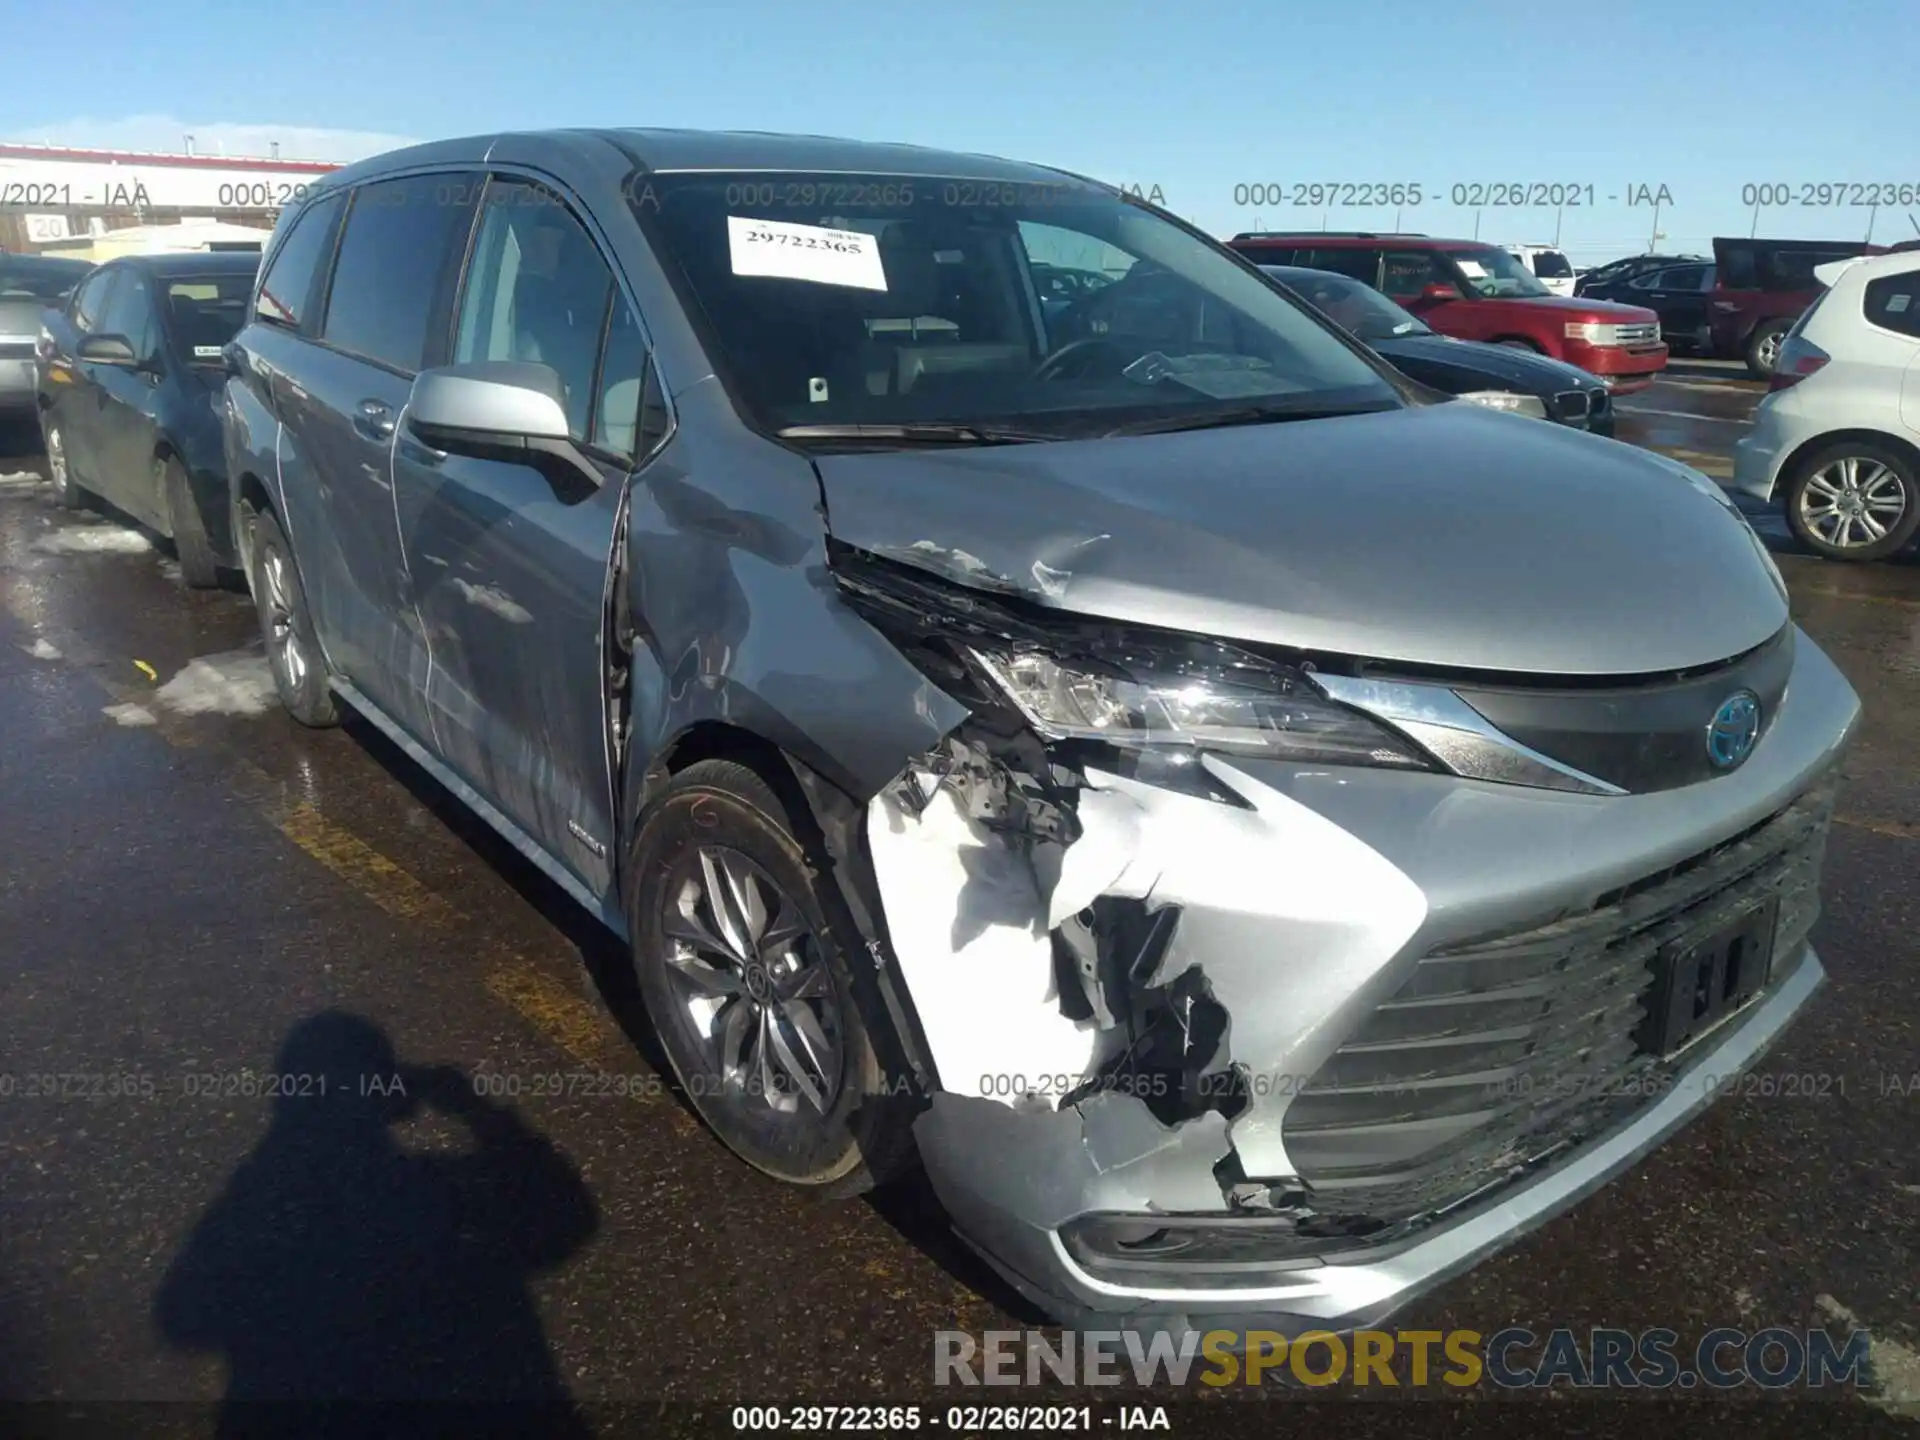 6 Photograph of a damaged car 5TDKRKEC4MS017075 TOYOTA SIENNA 2021